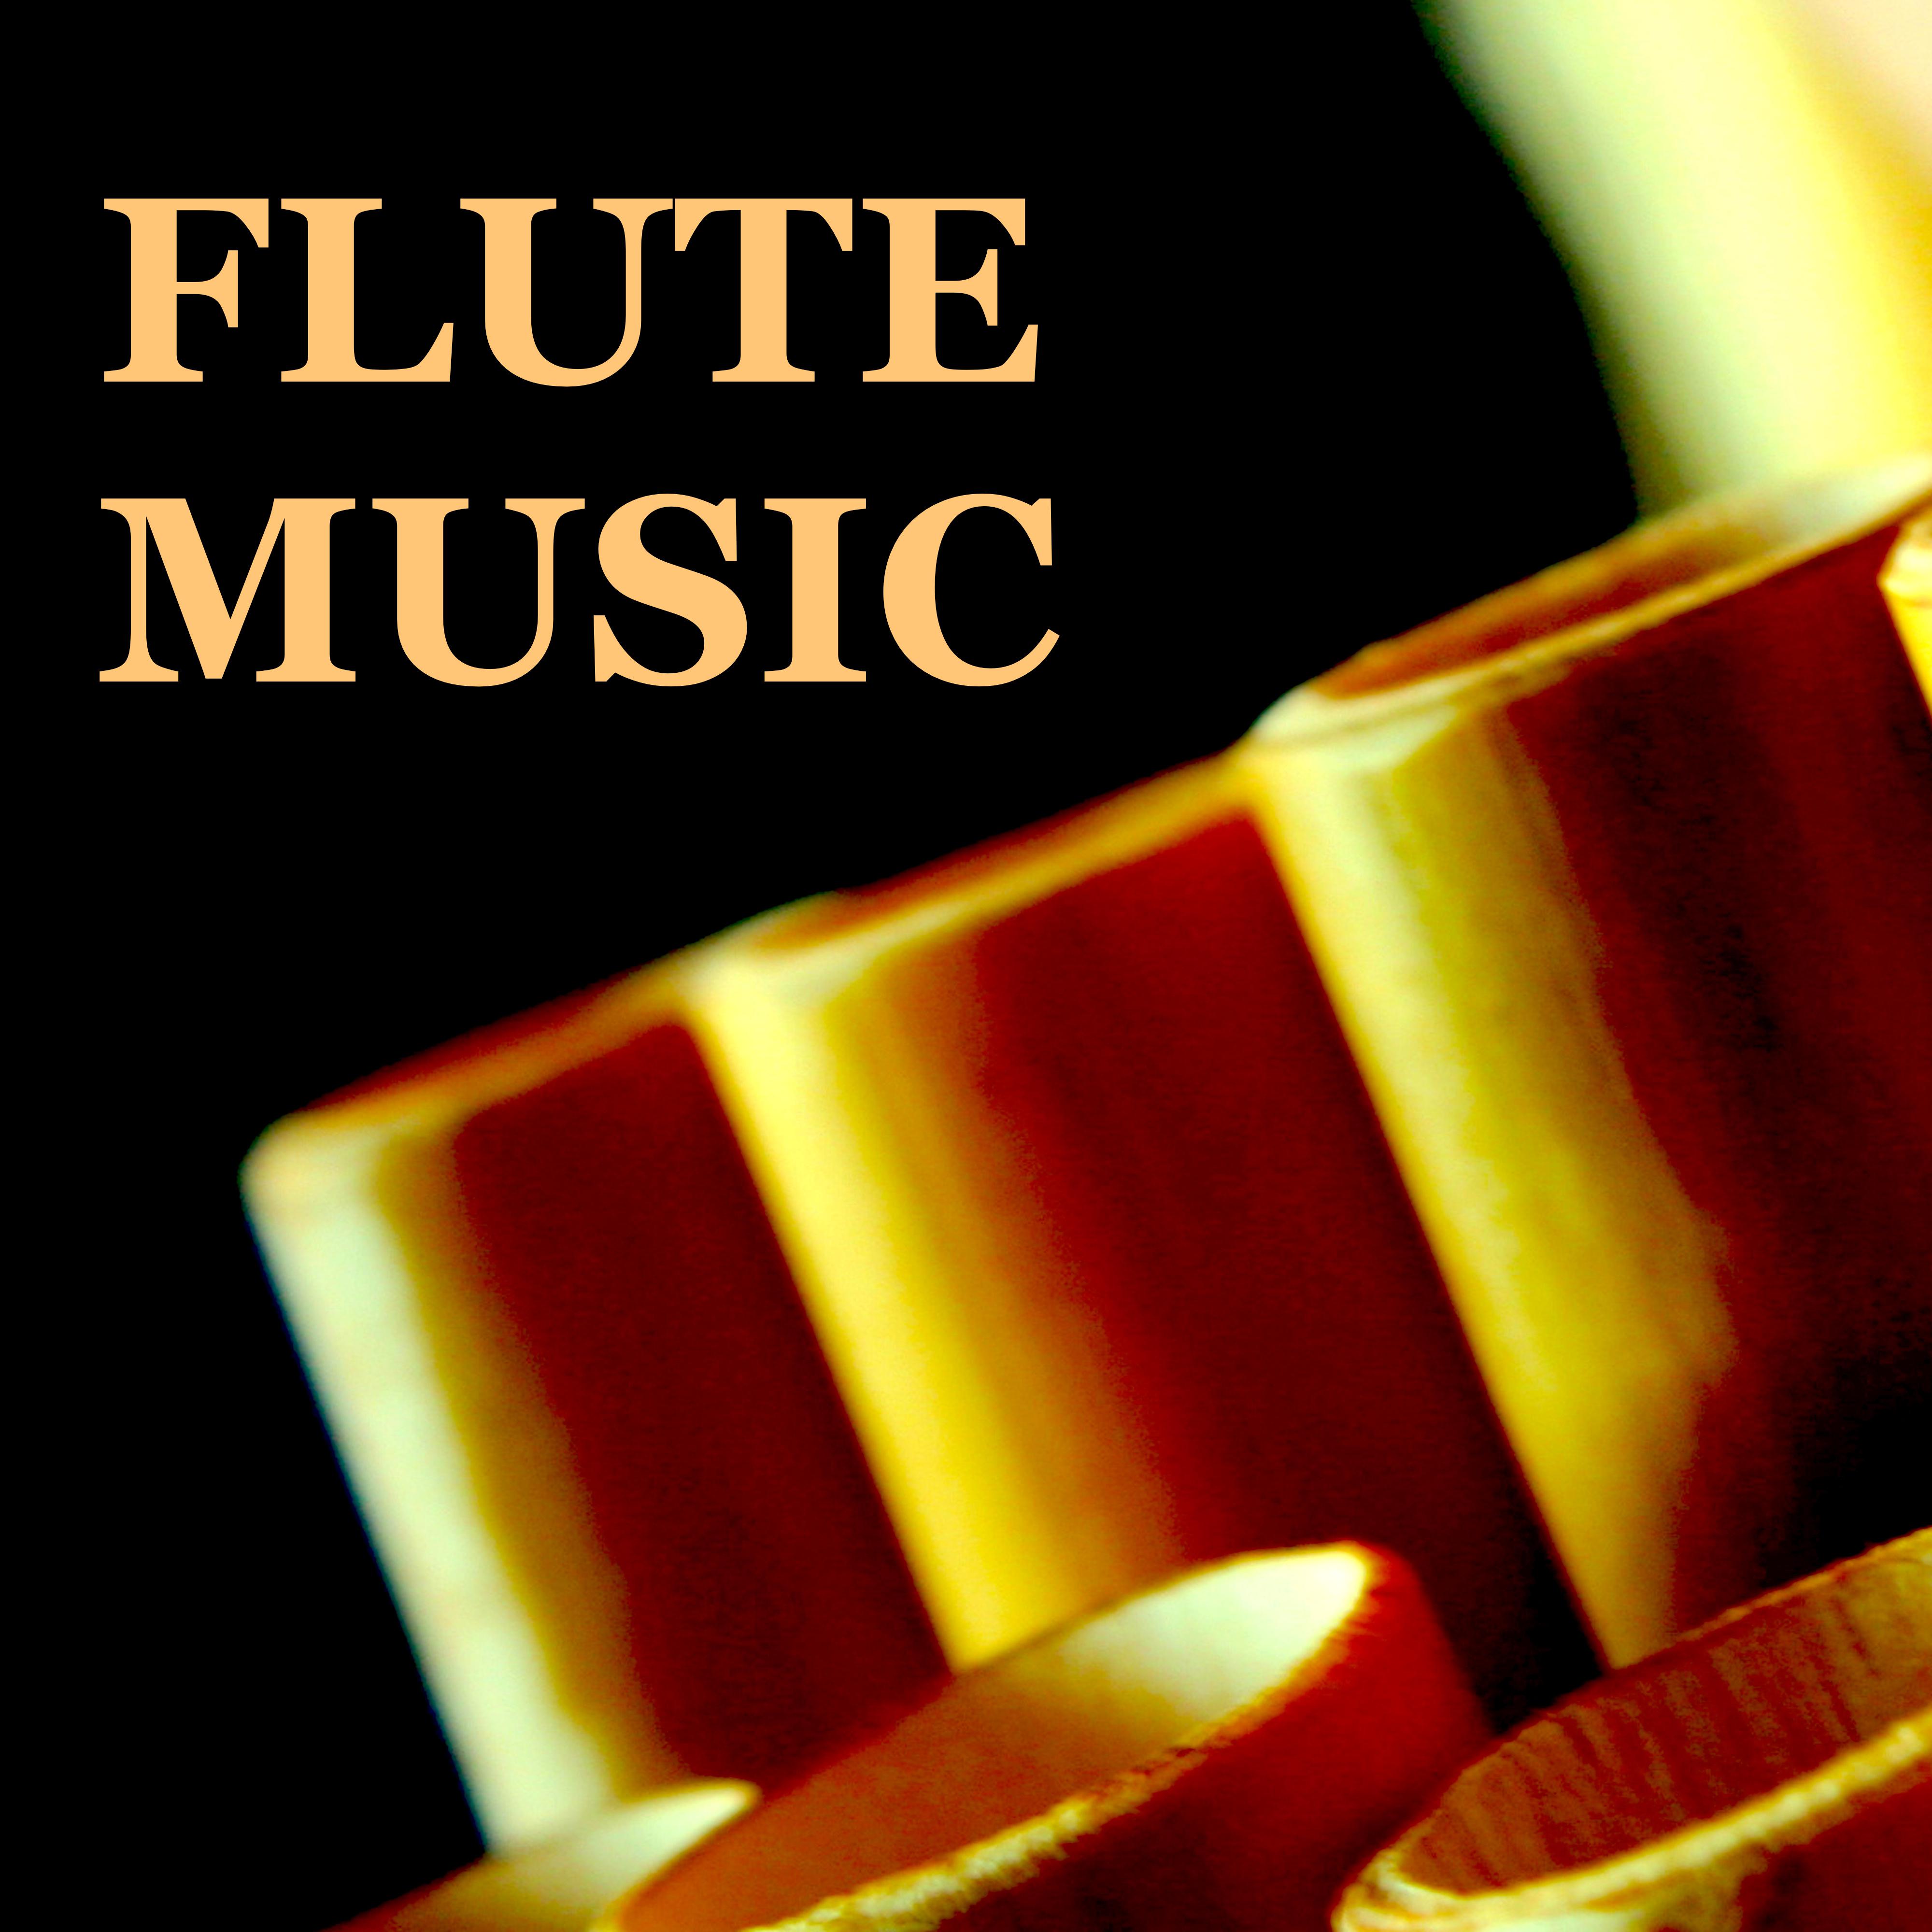 Flute Music: Flute Solo & Sounds of Nature to Help You Sleep Well and Soundly